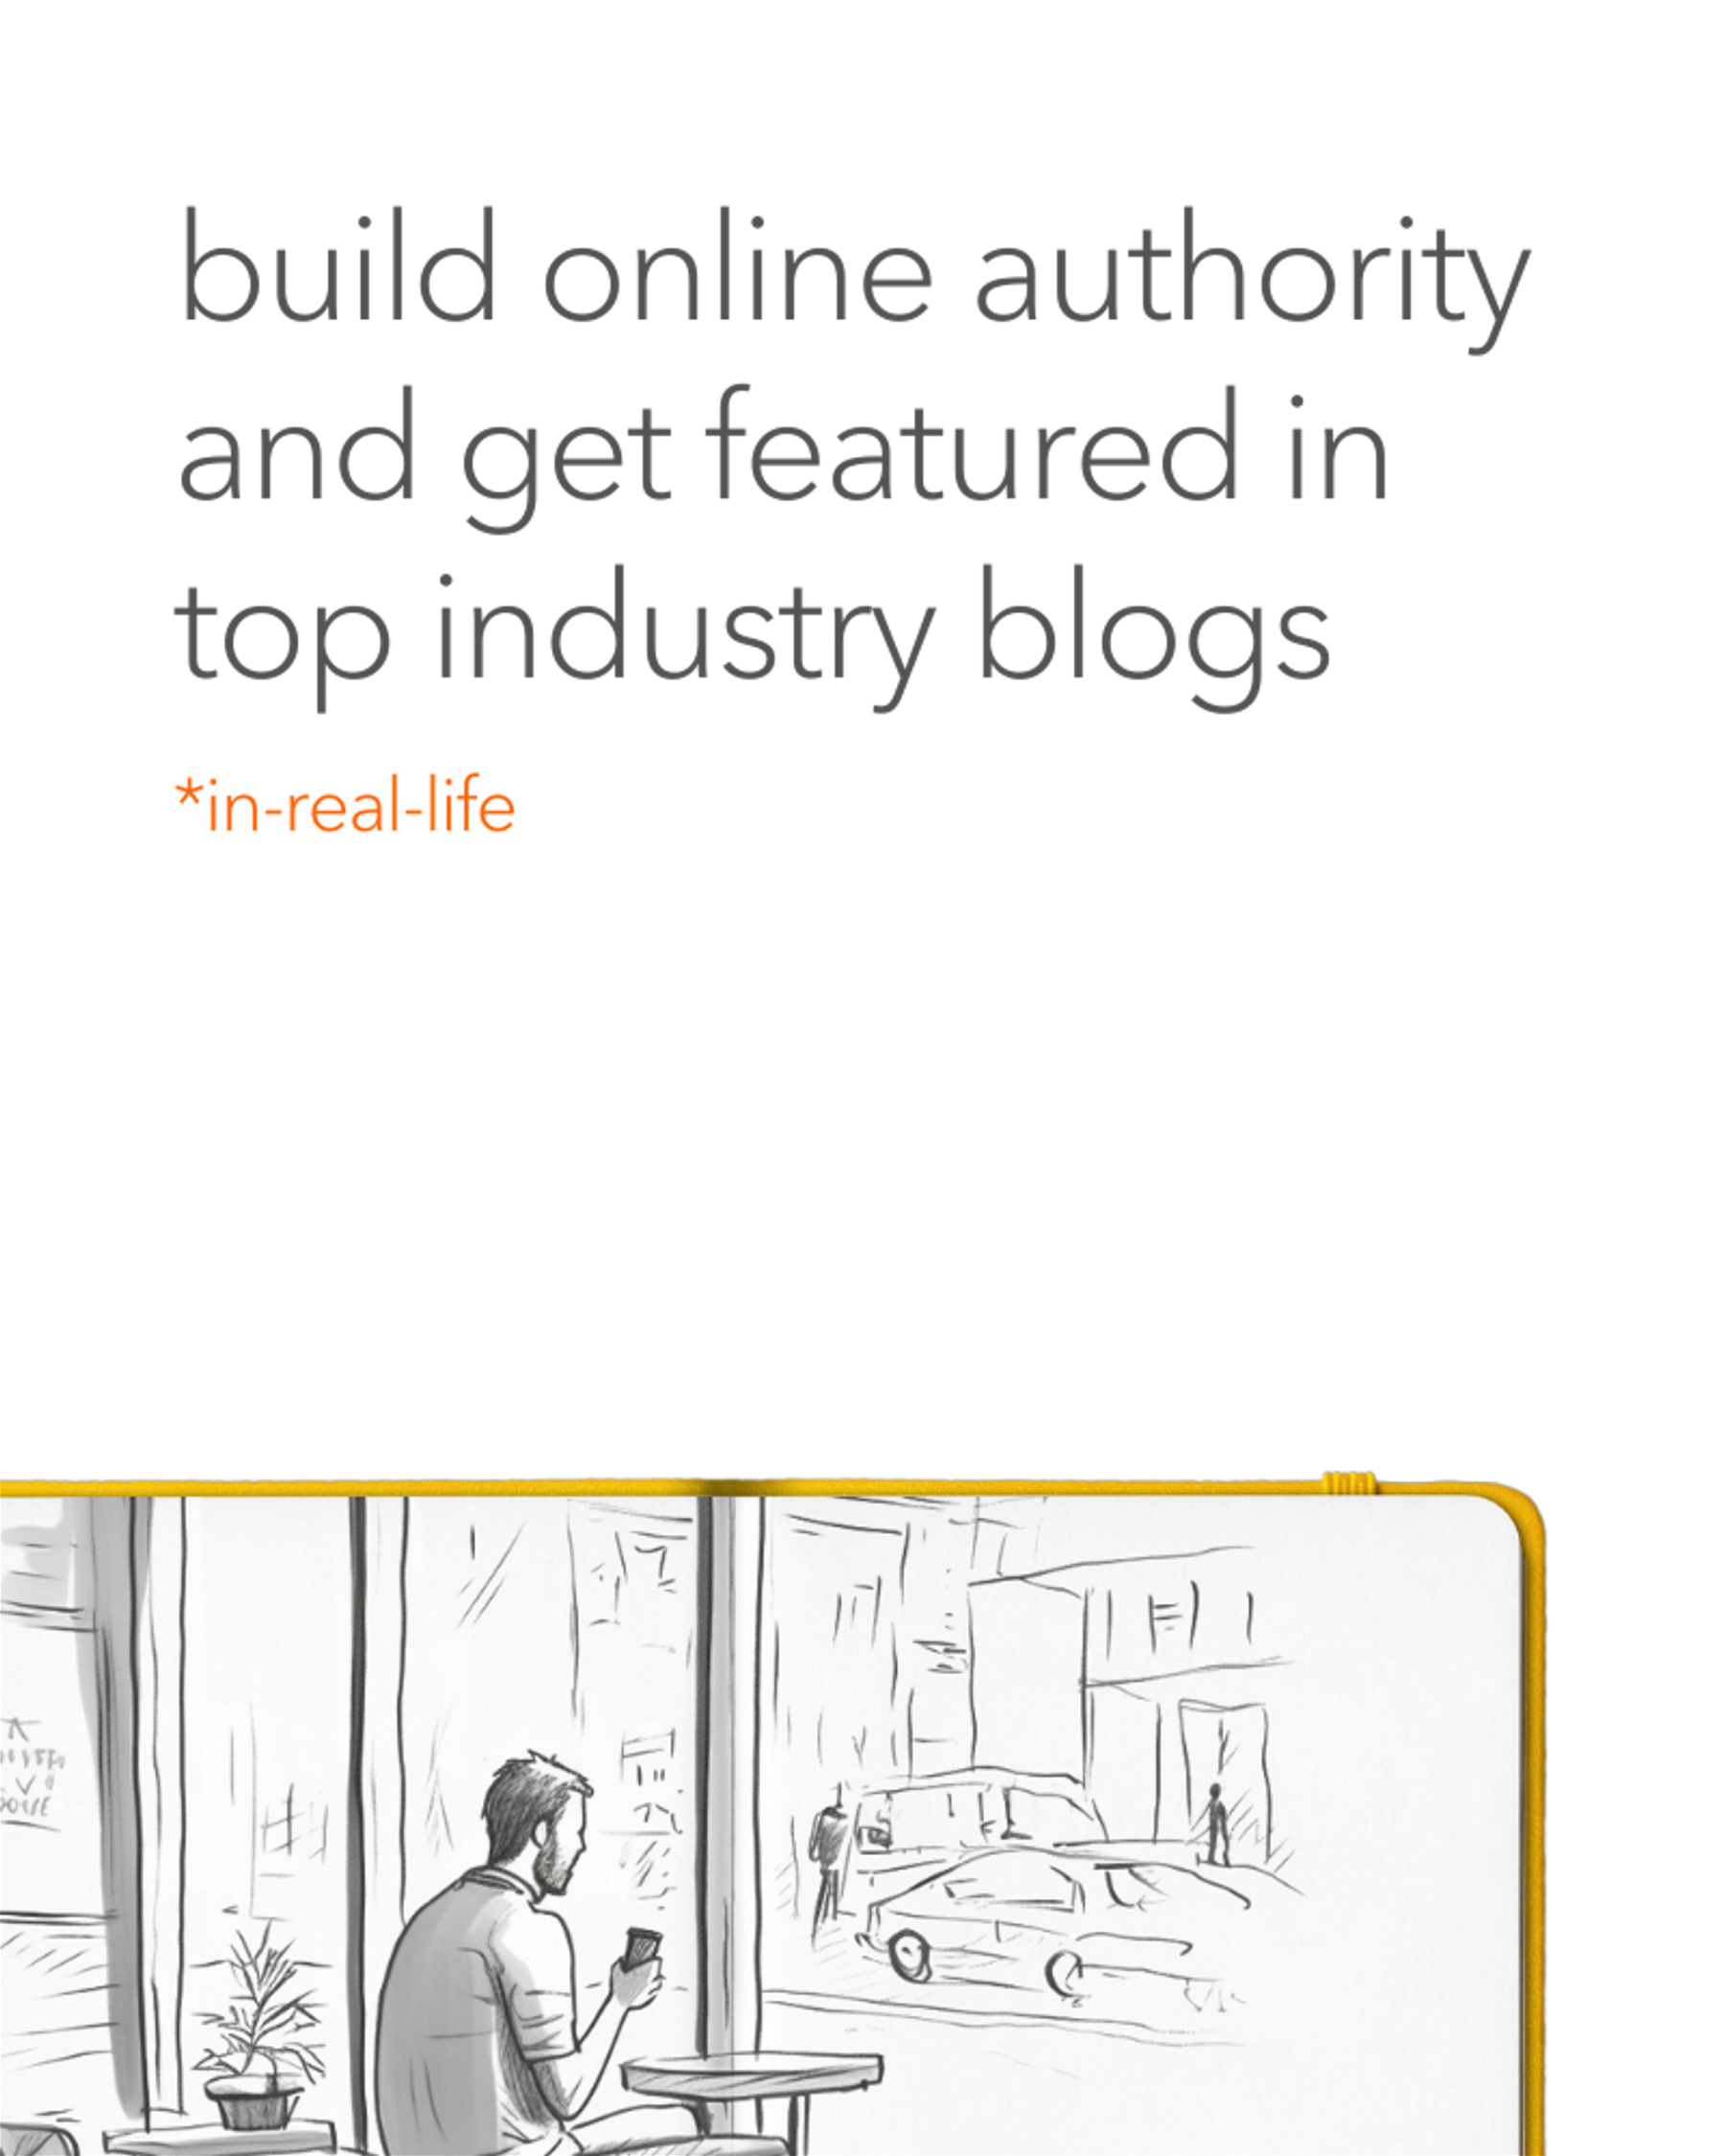 The Ultimate 12-Month Strategy for Business Coaches to Build Online Authority and Get Featured in Top Industry Blogs